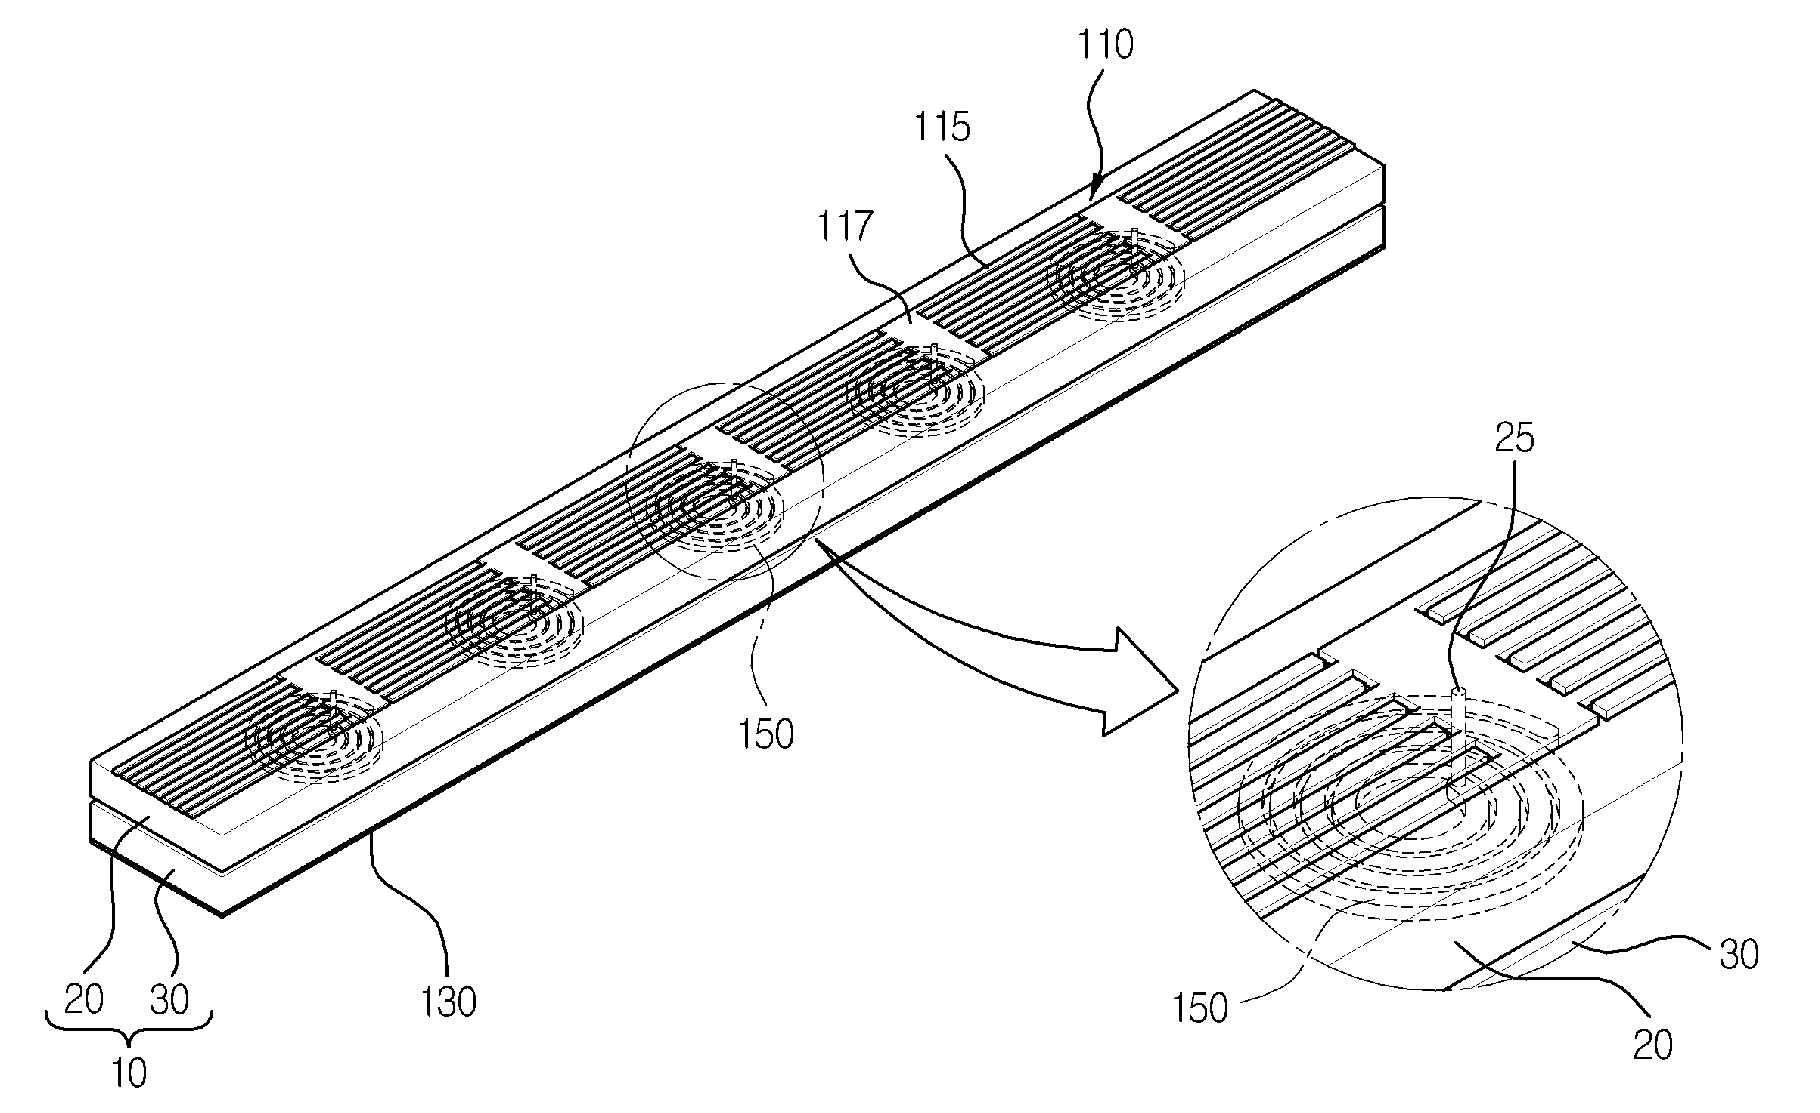 Transmission line with left-hand characteristics including a spiral inductive element